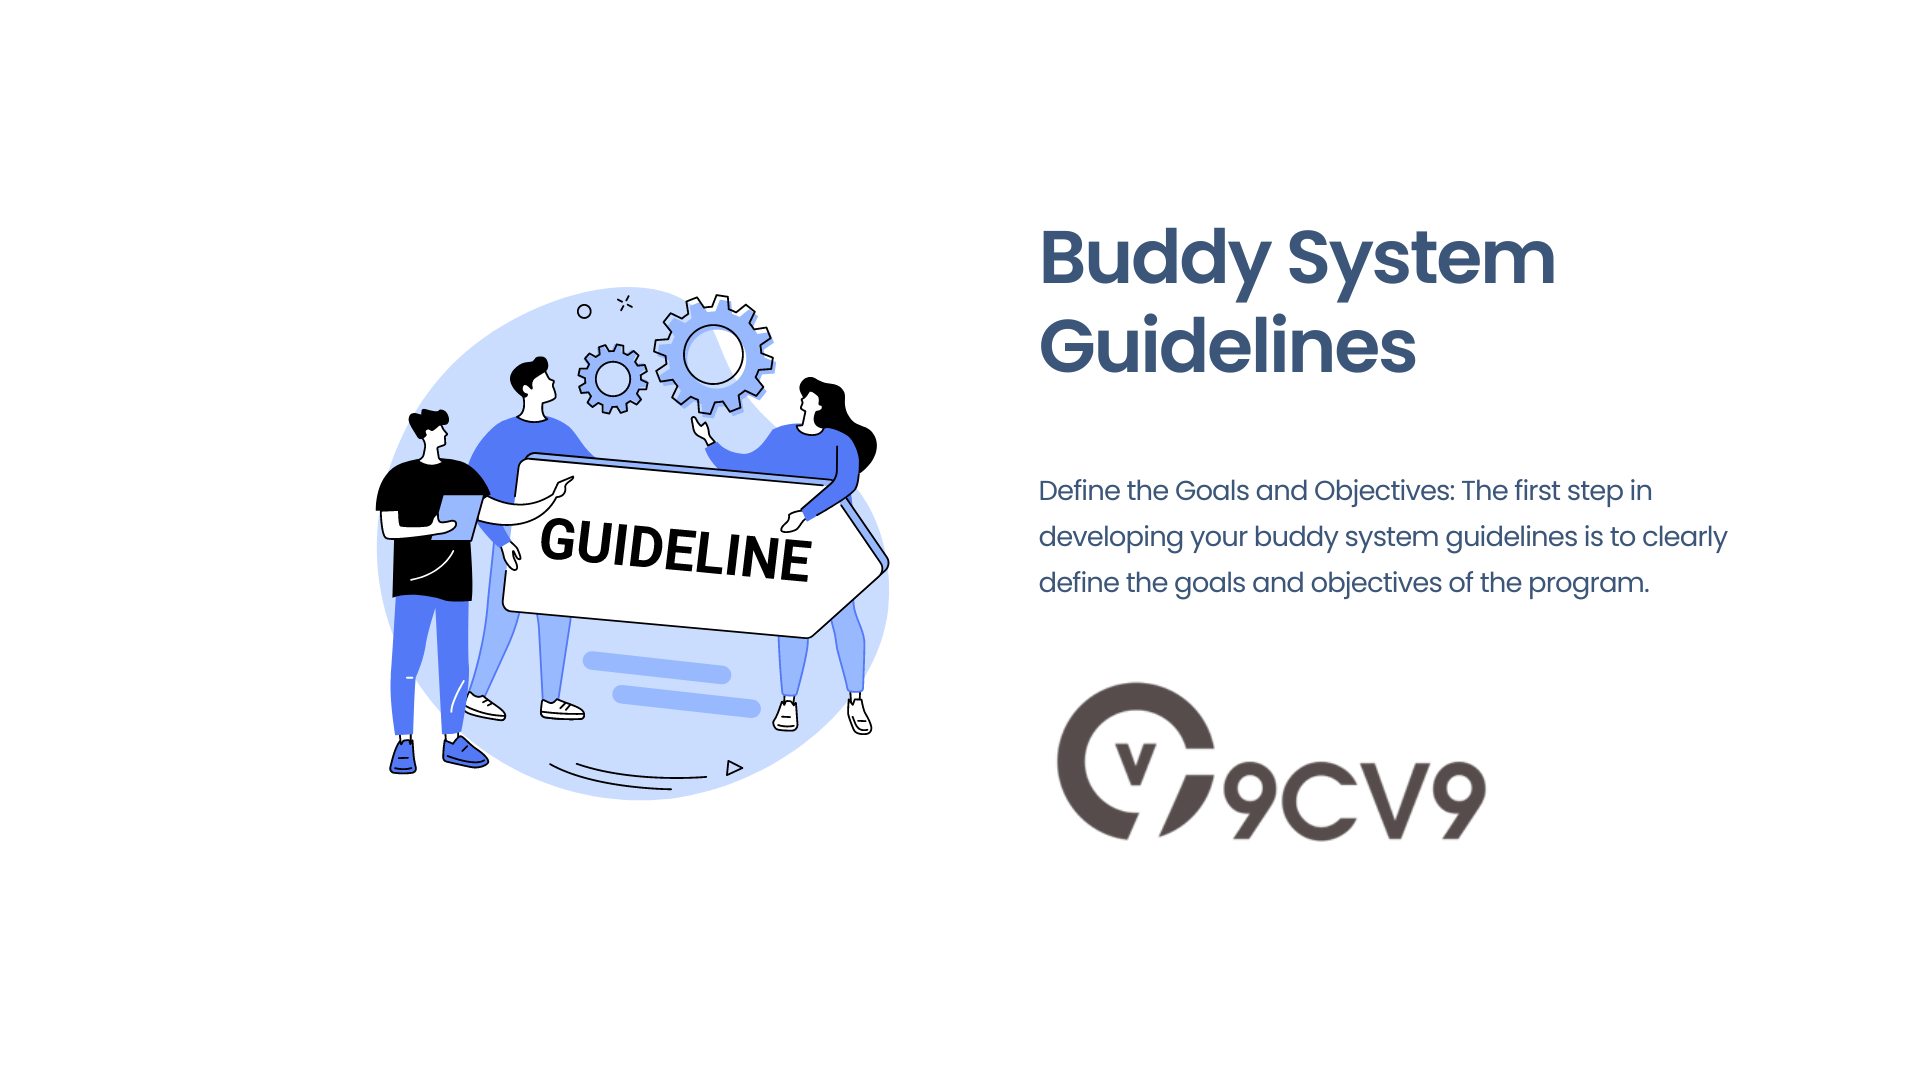 Buddy System Guidelines